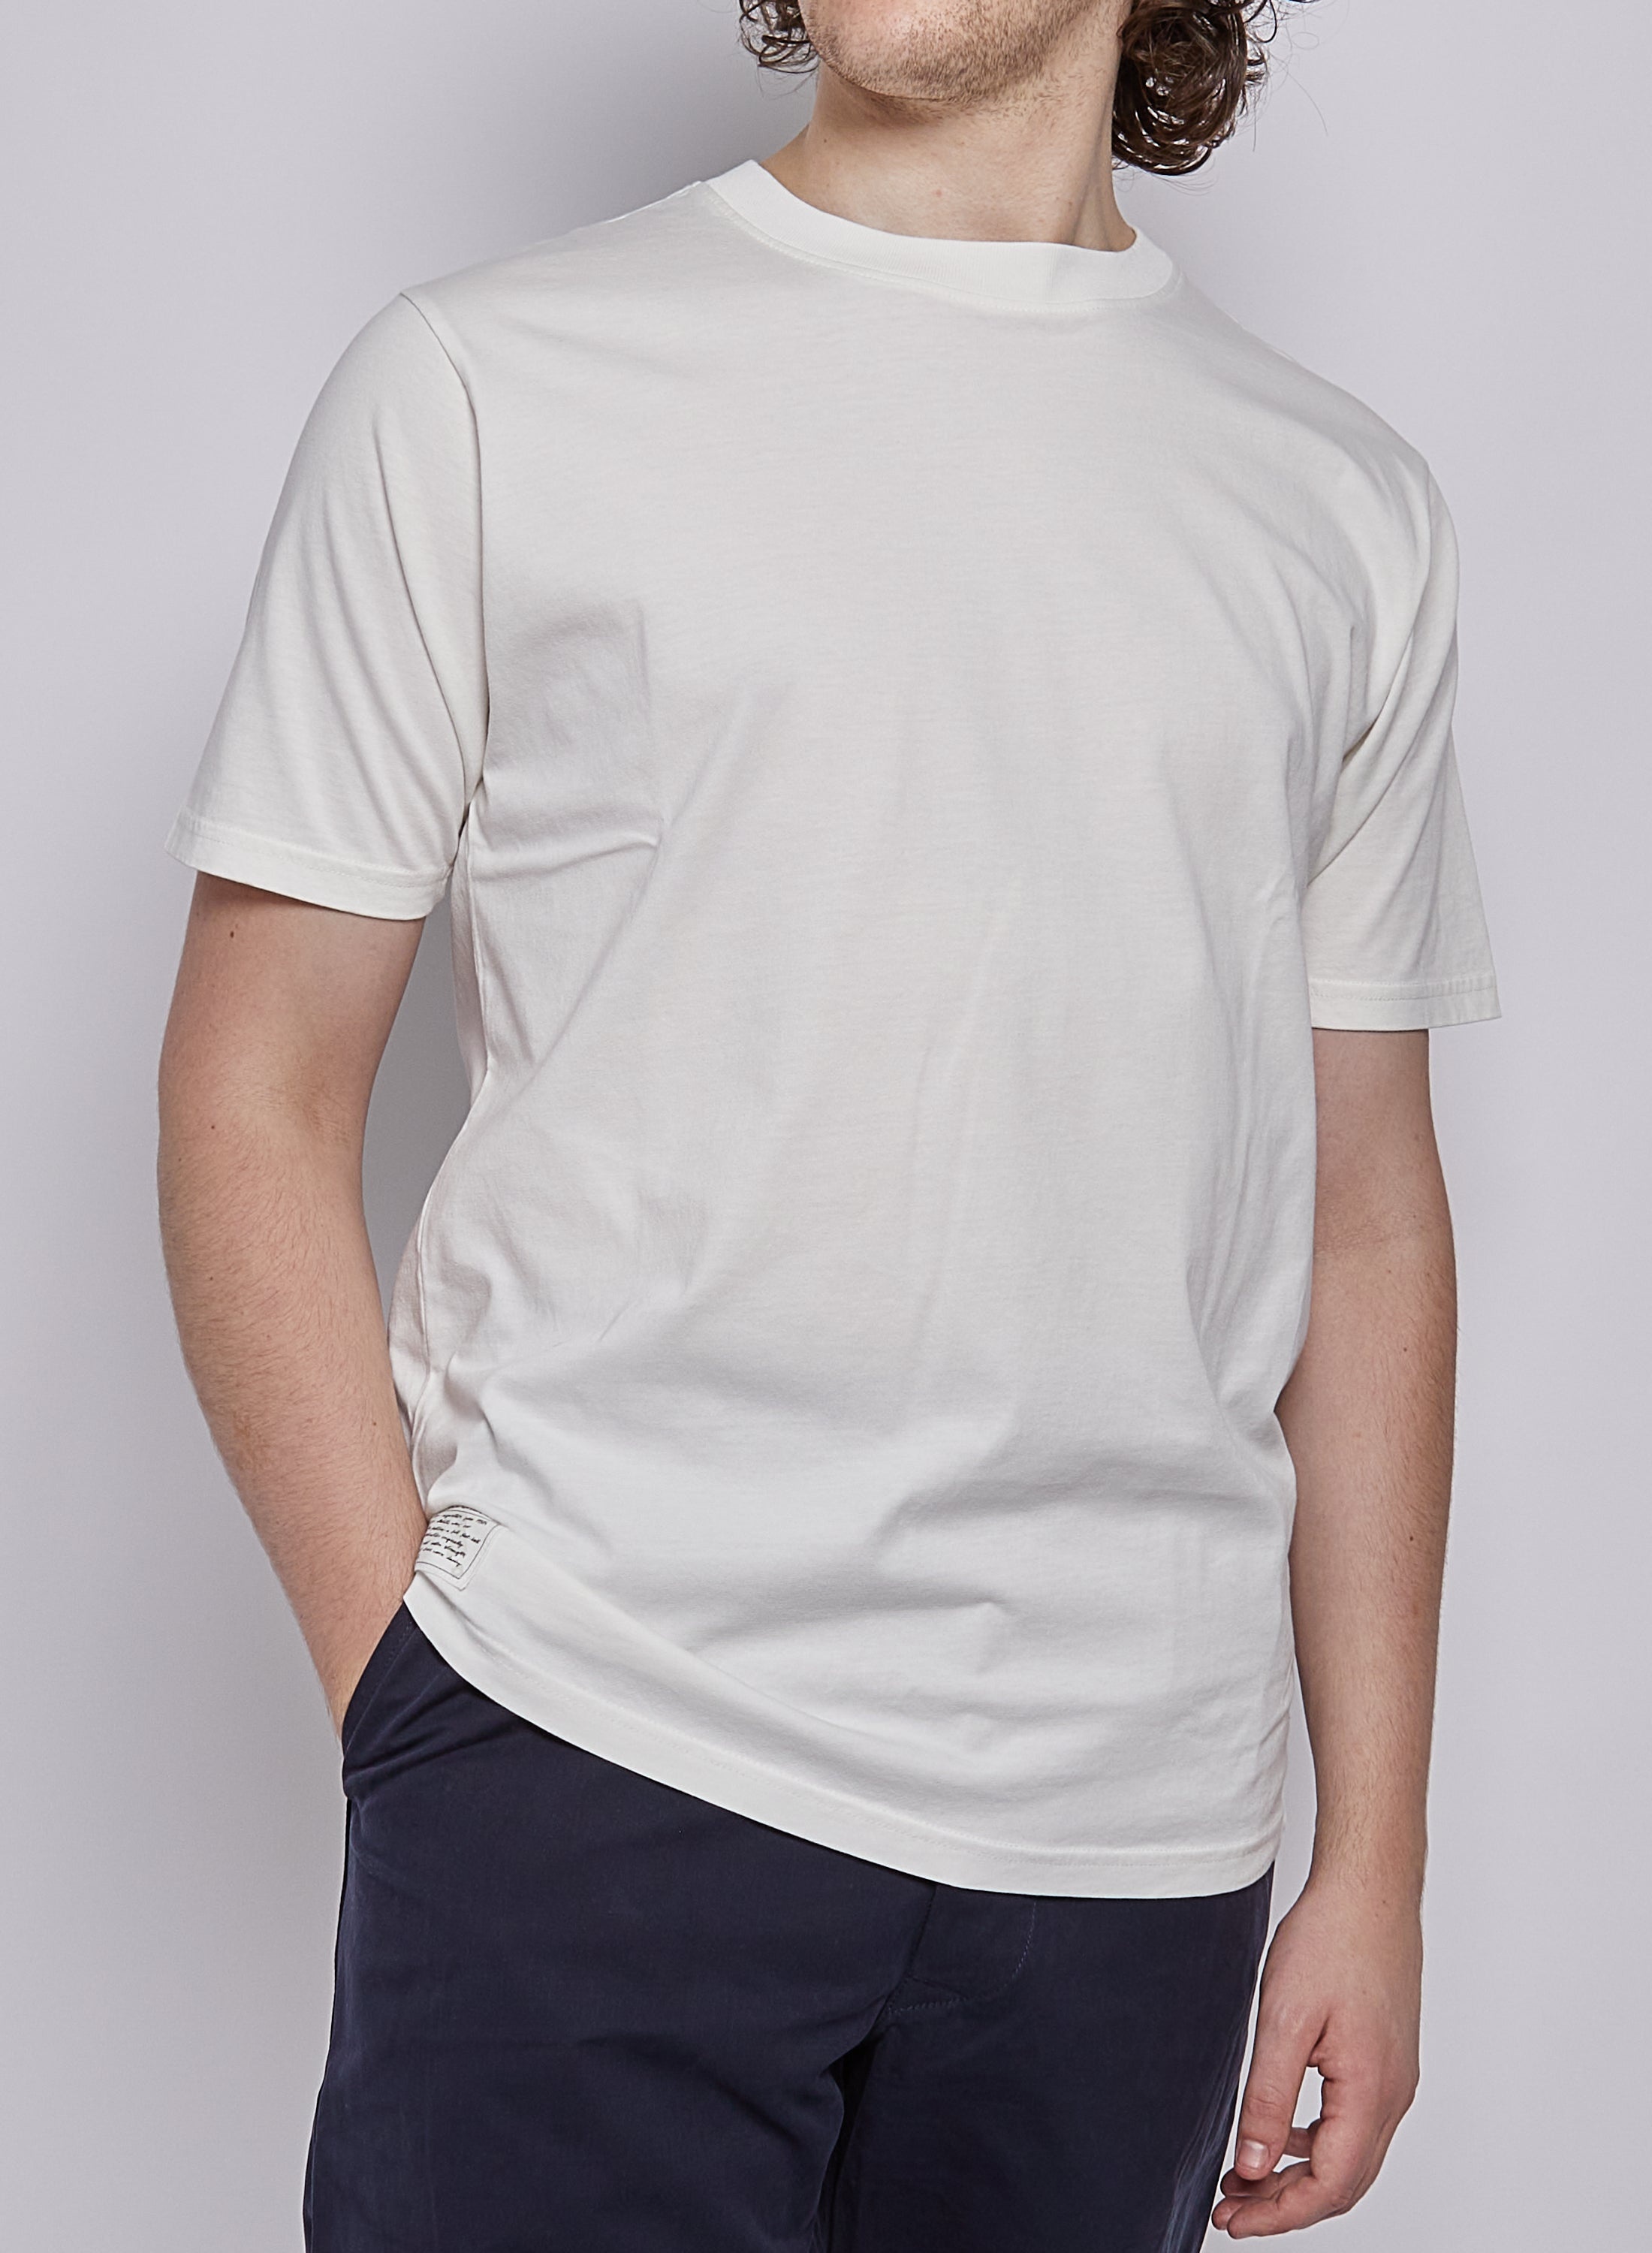 Classic Relaxed Fit Tee in Stone Wash White - 3